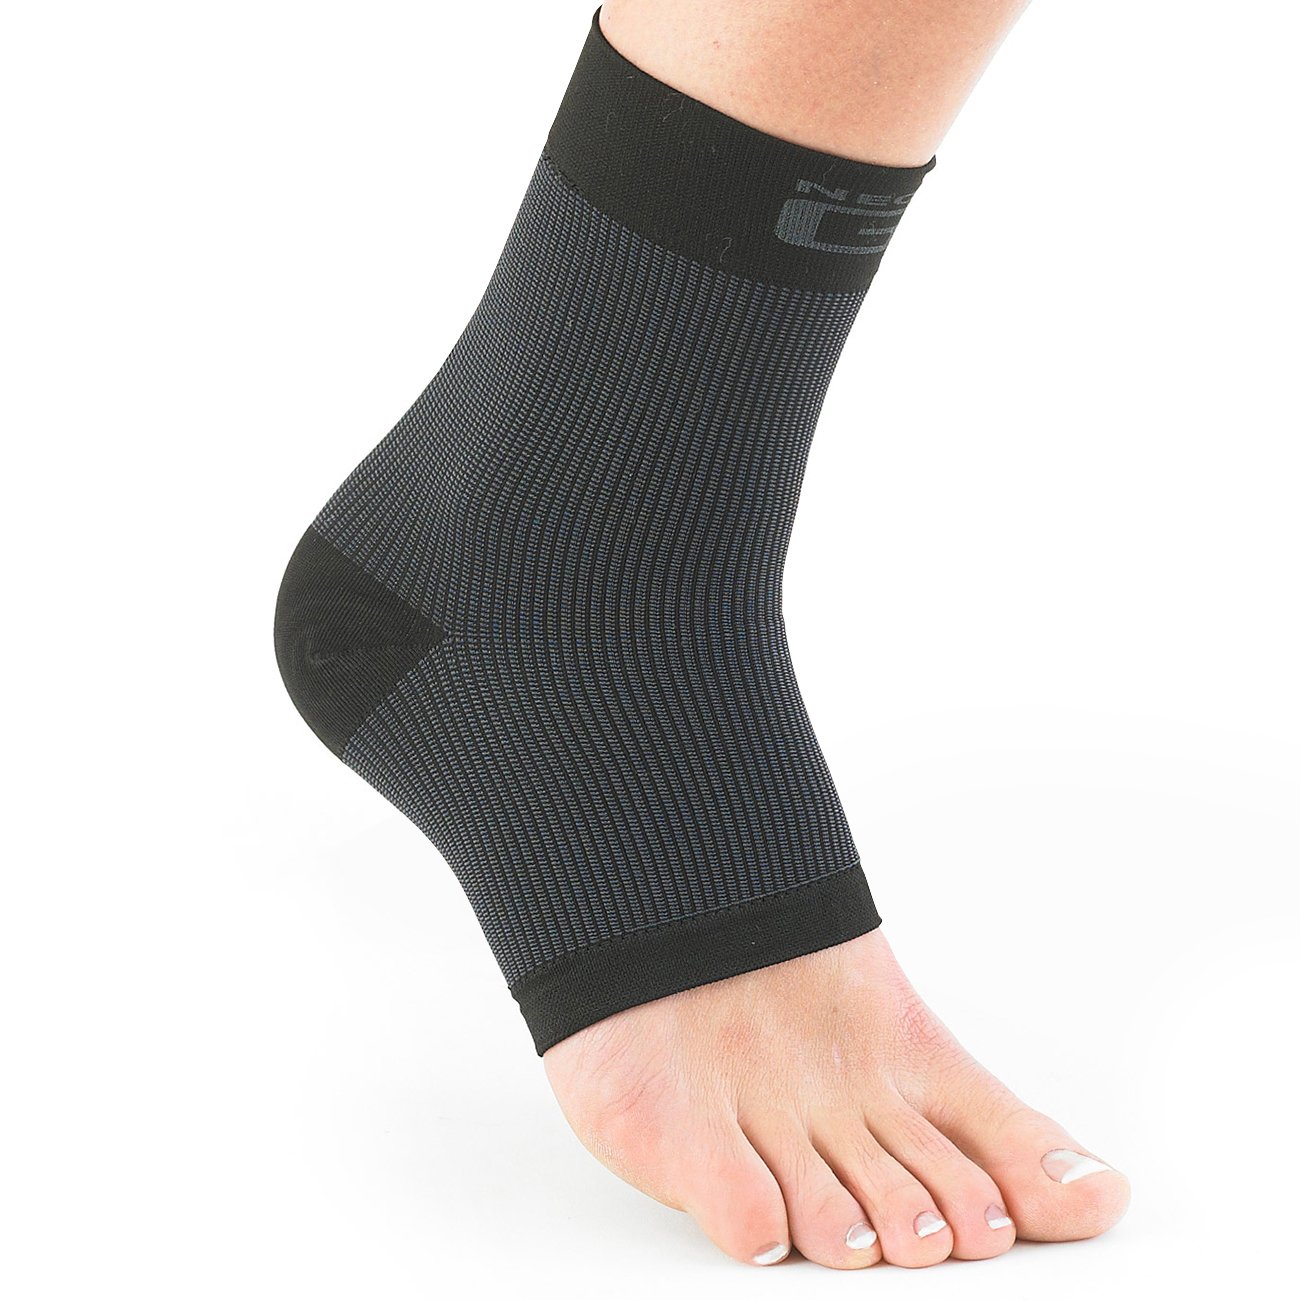 Neo G Airflow Ankle Support - X Large